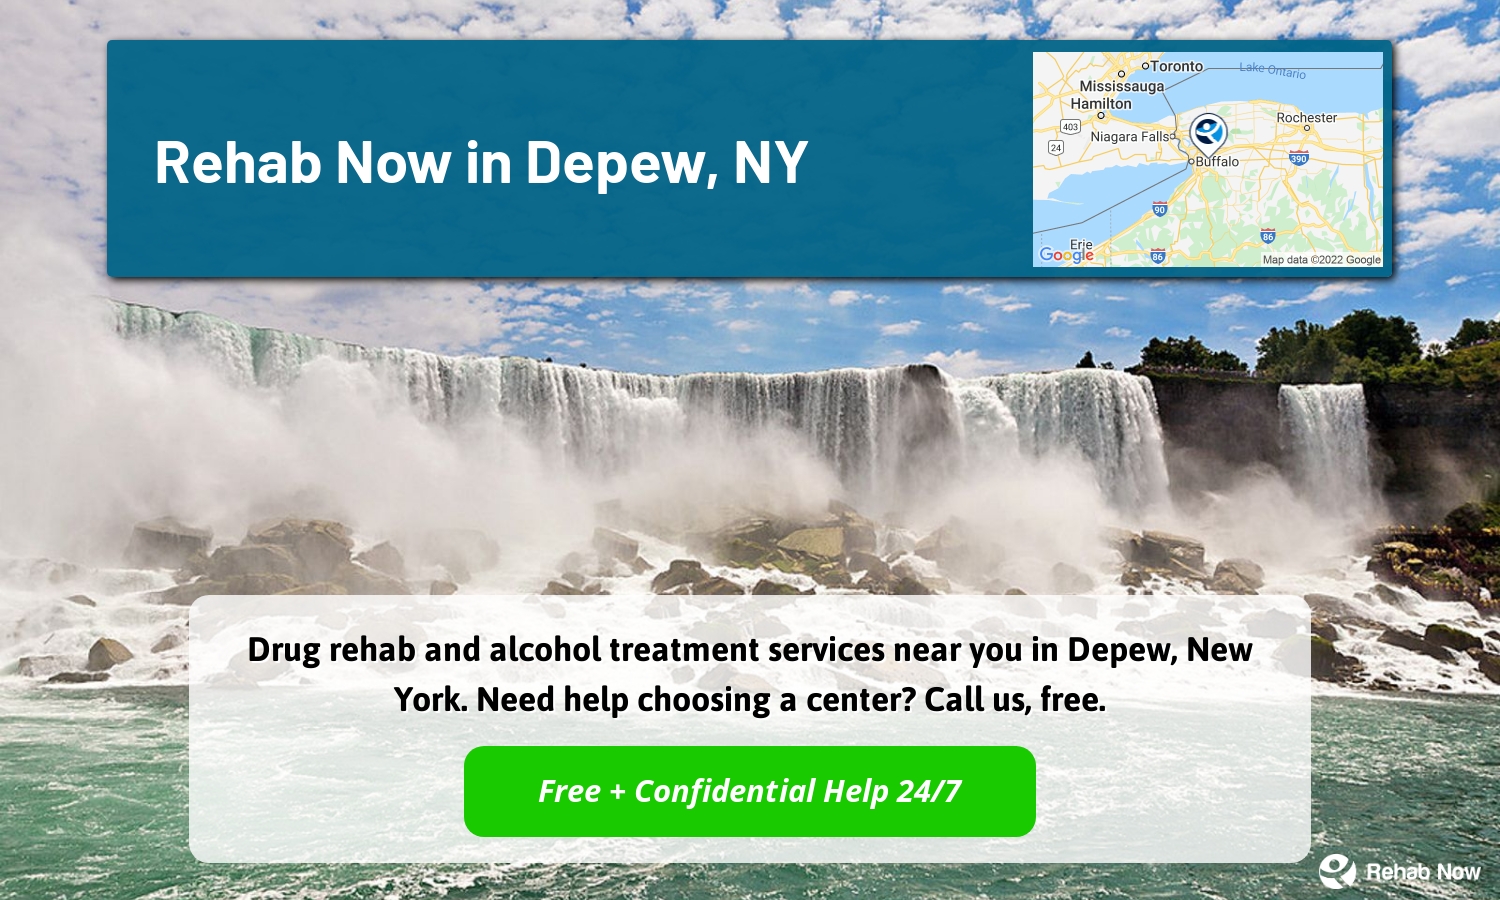 Drug rehab and alcohol treatment services near you in Depew, New York. Need help choosing a center? Call us, free.